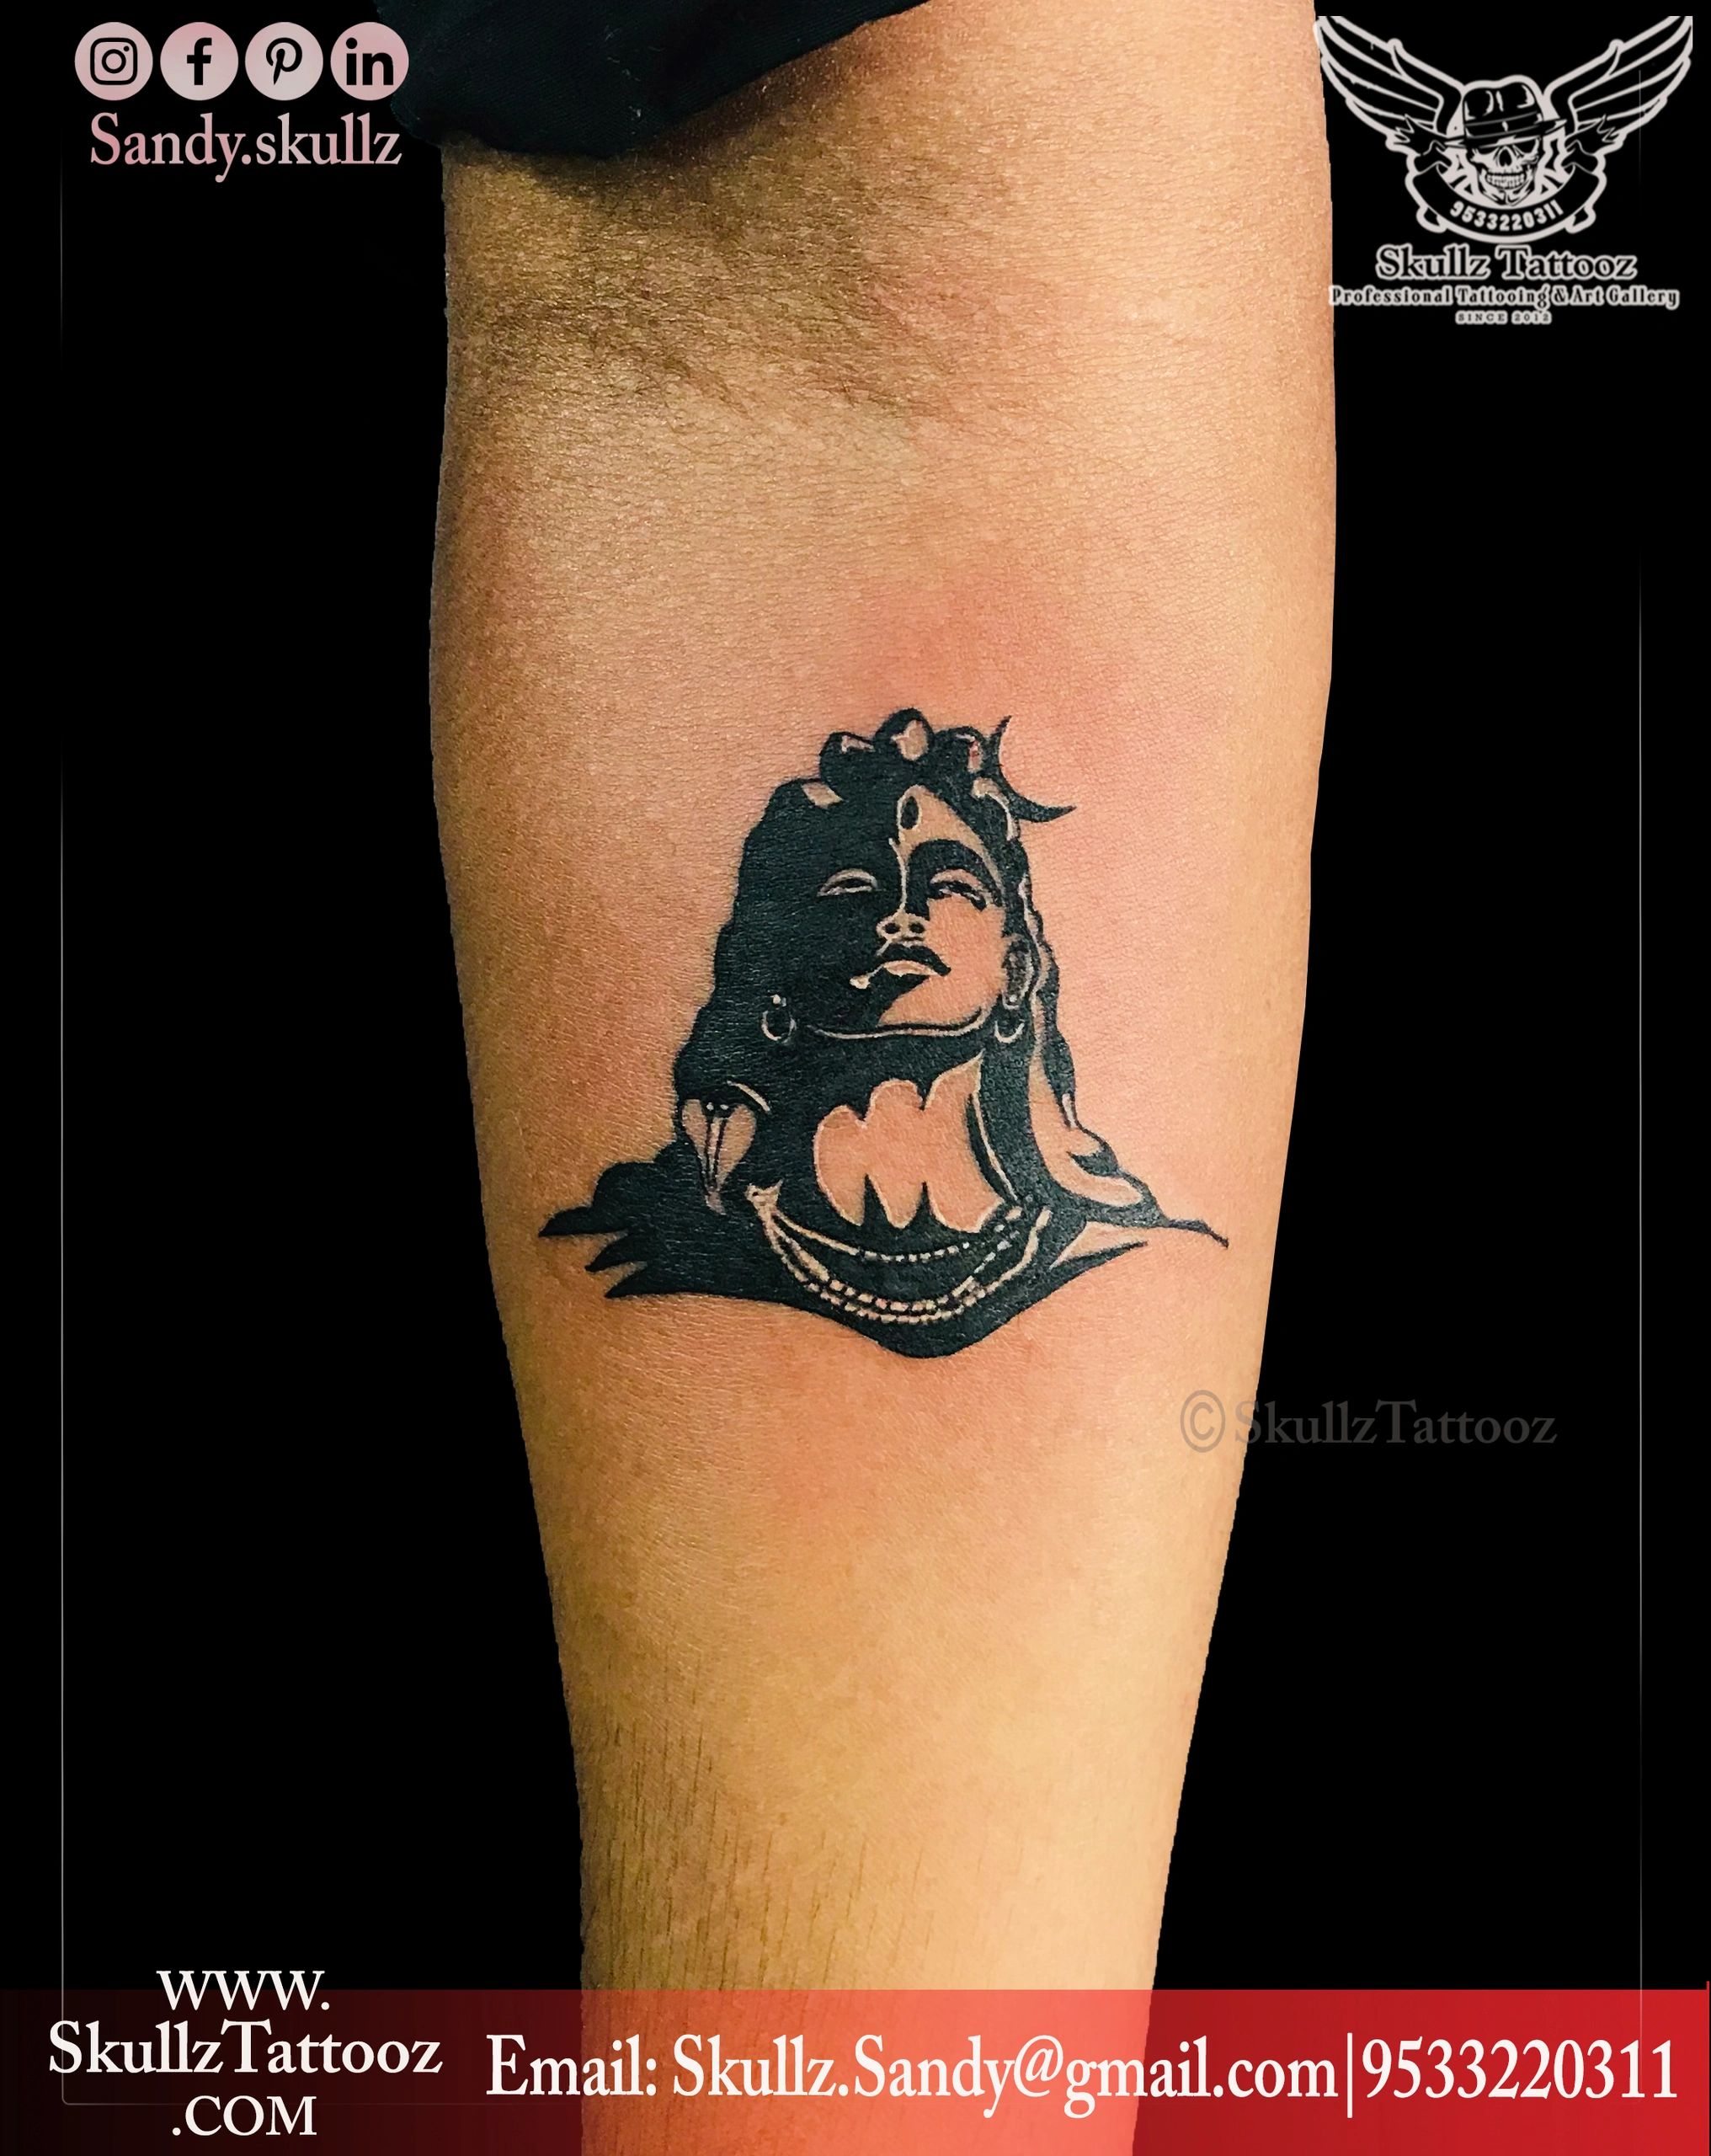 25 Best Lord Shiva Tattoo Ideas with Images  Shiva tattoo design Shiva  tattoo Tattoo designs wrist